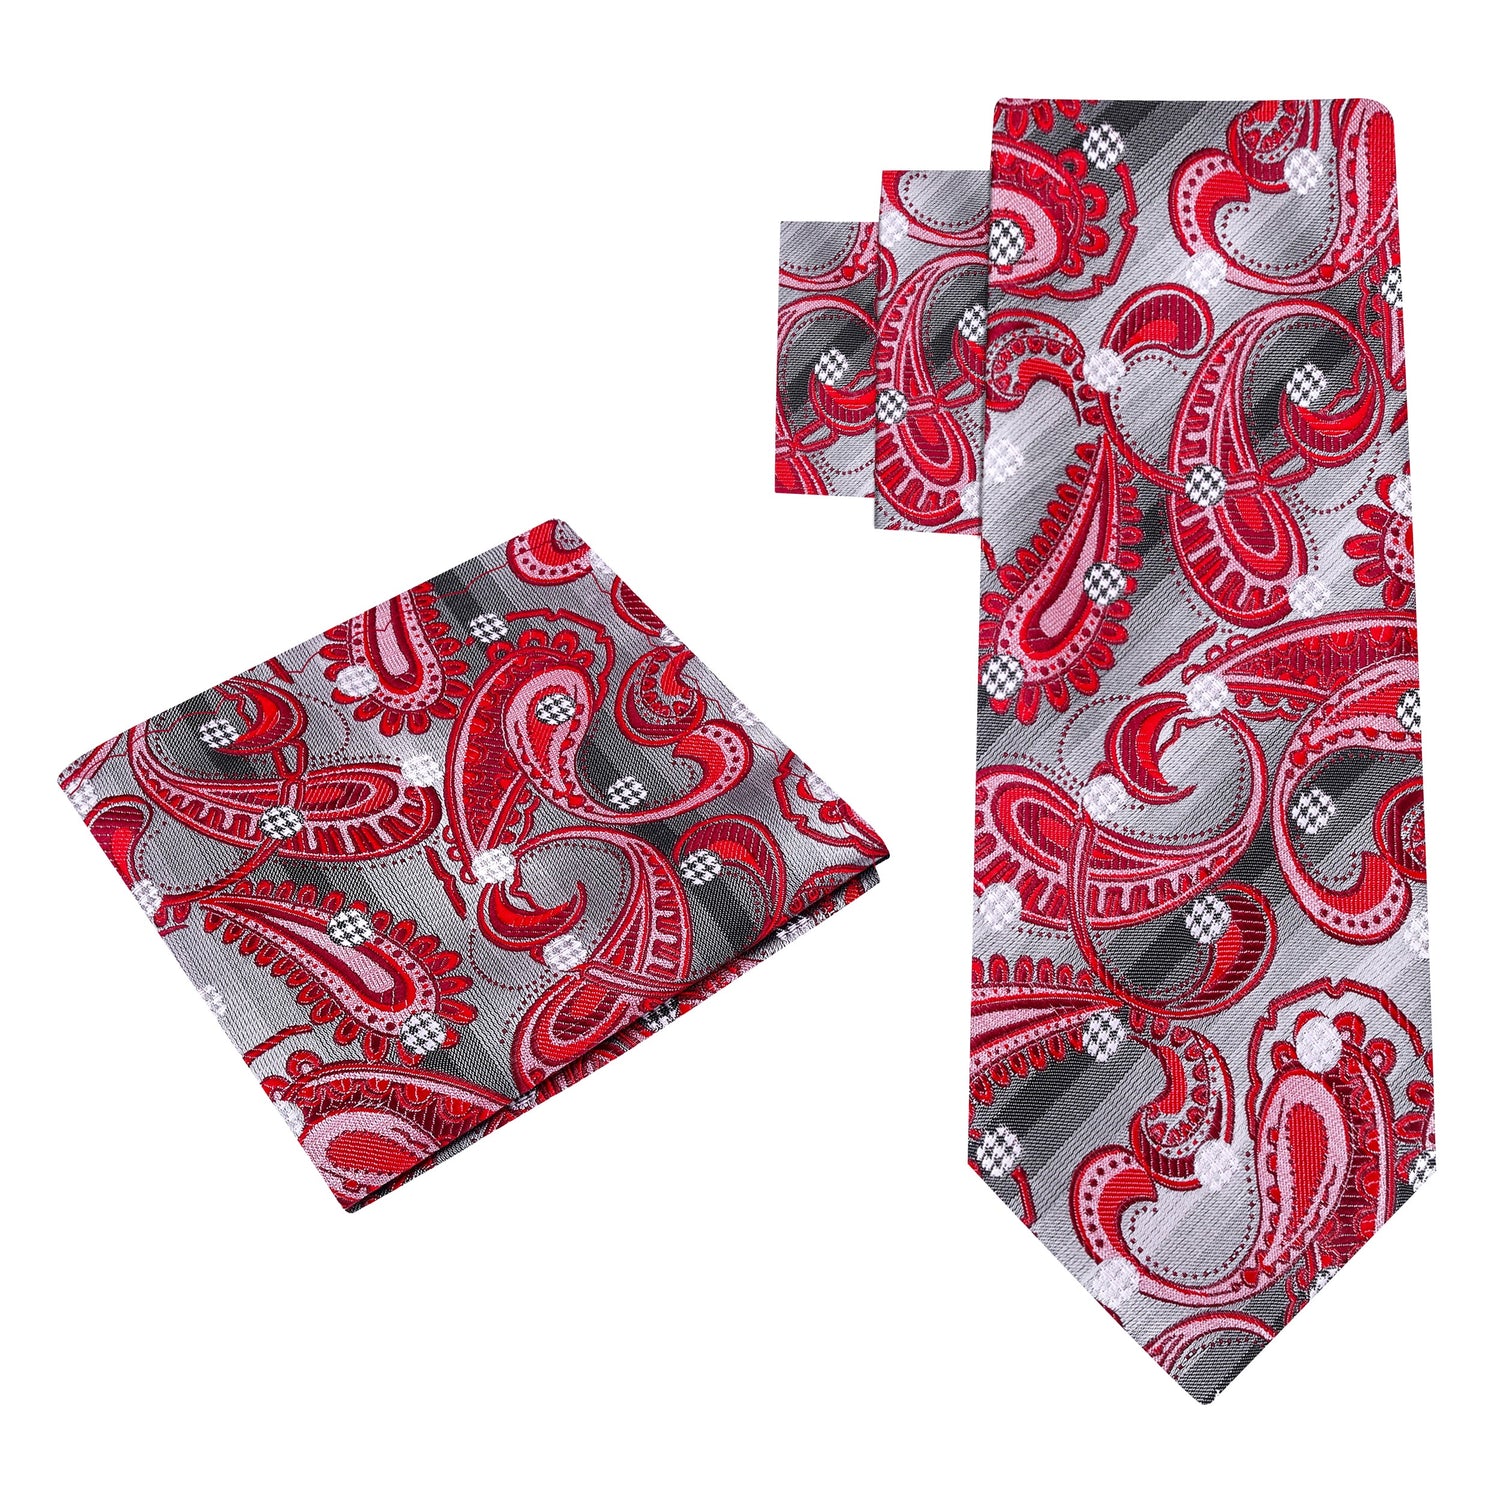 Alt View: A Red, Grey, White Paisley And Dots Silk Necktie, Matching Pocket Square